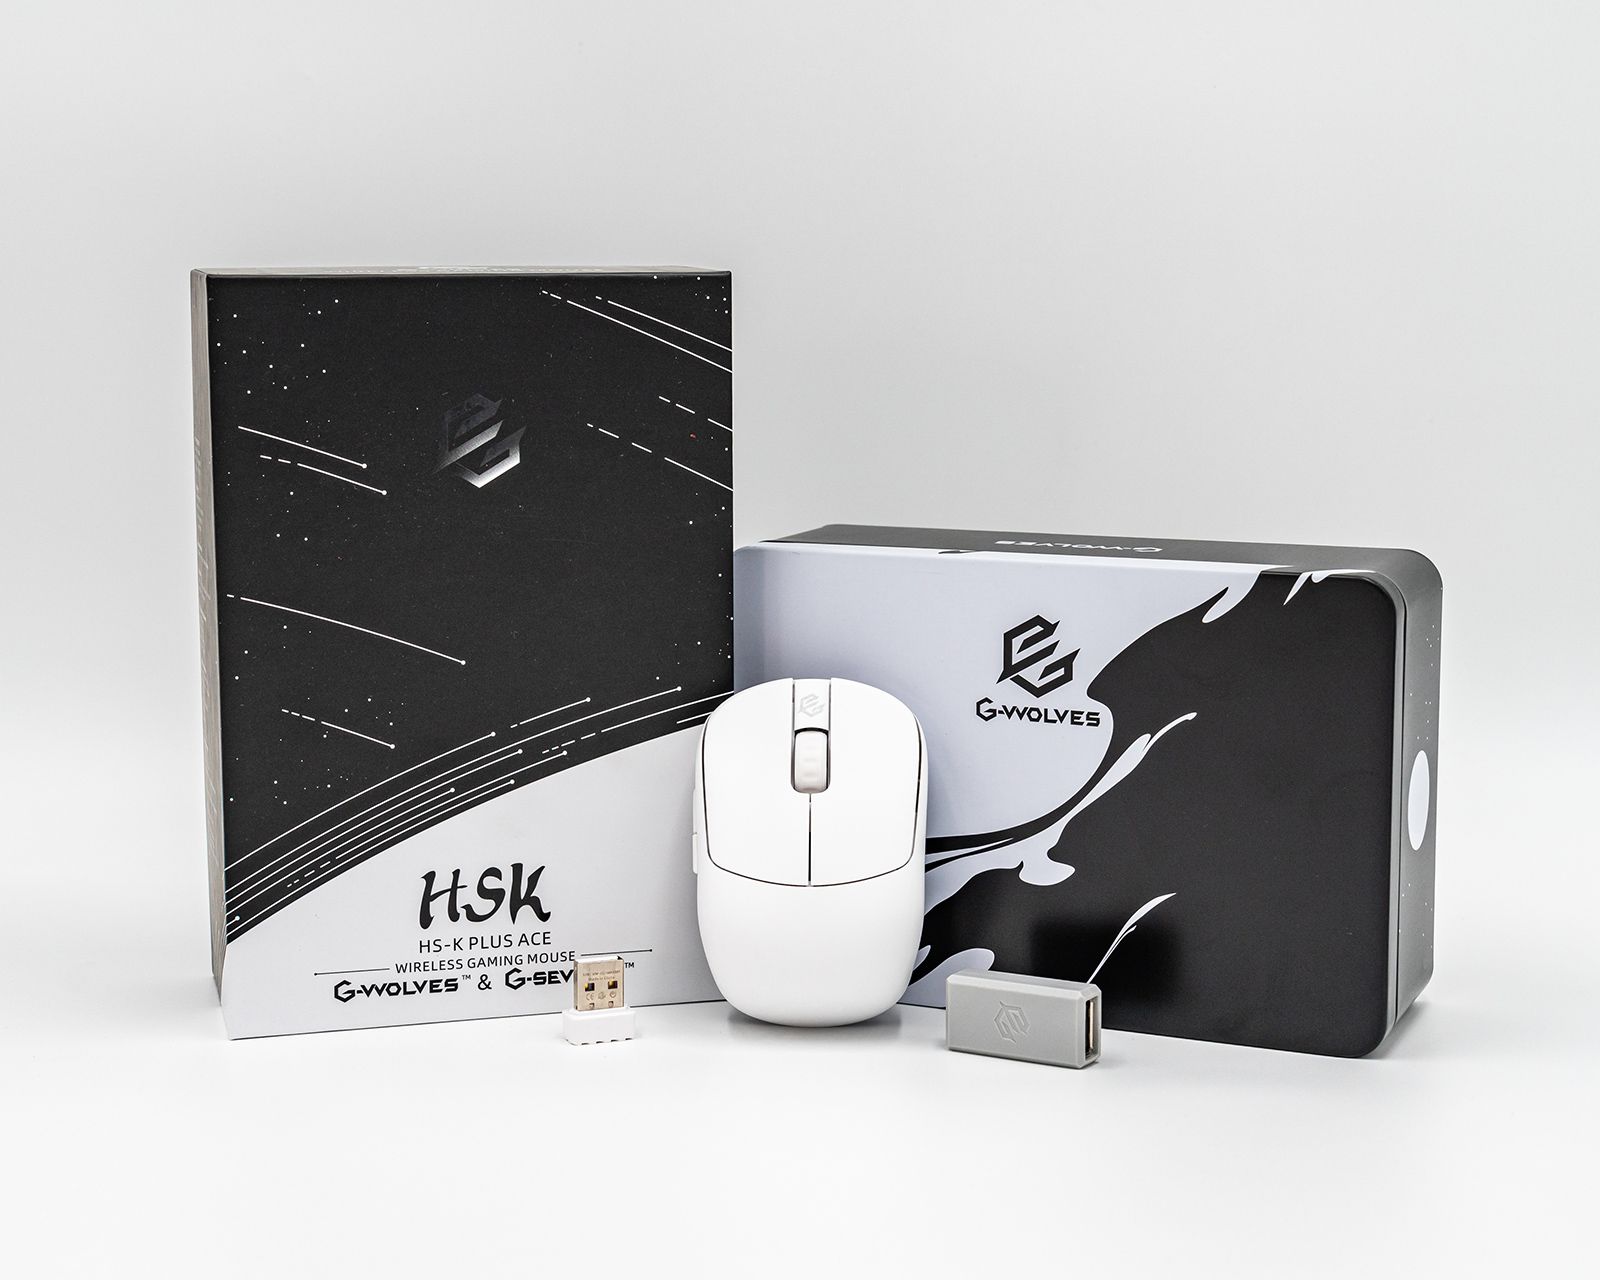 G-WOLVES HSK PRO ACE WIRELESS 黒 [新品未開封]PC/タブレット